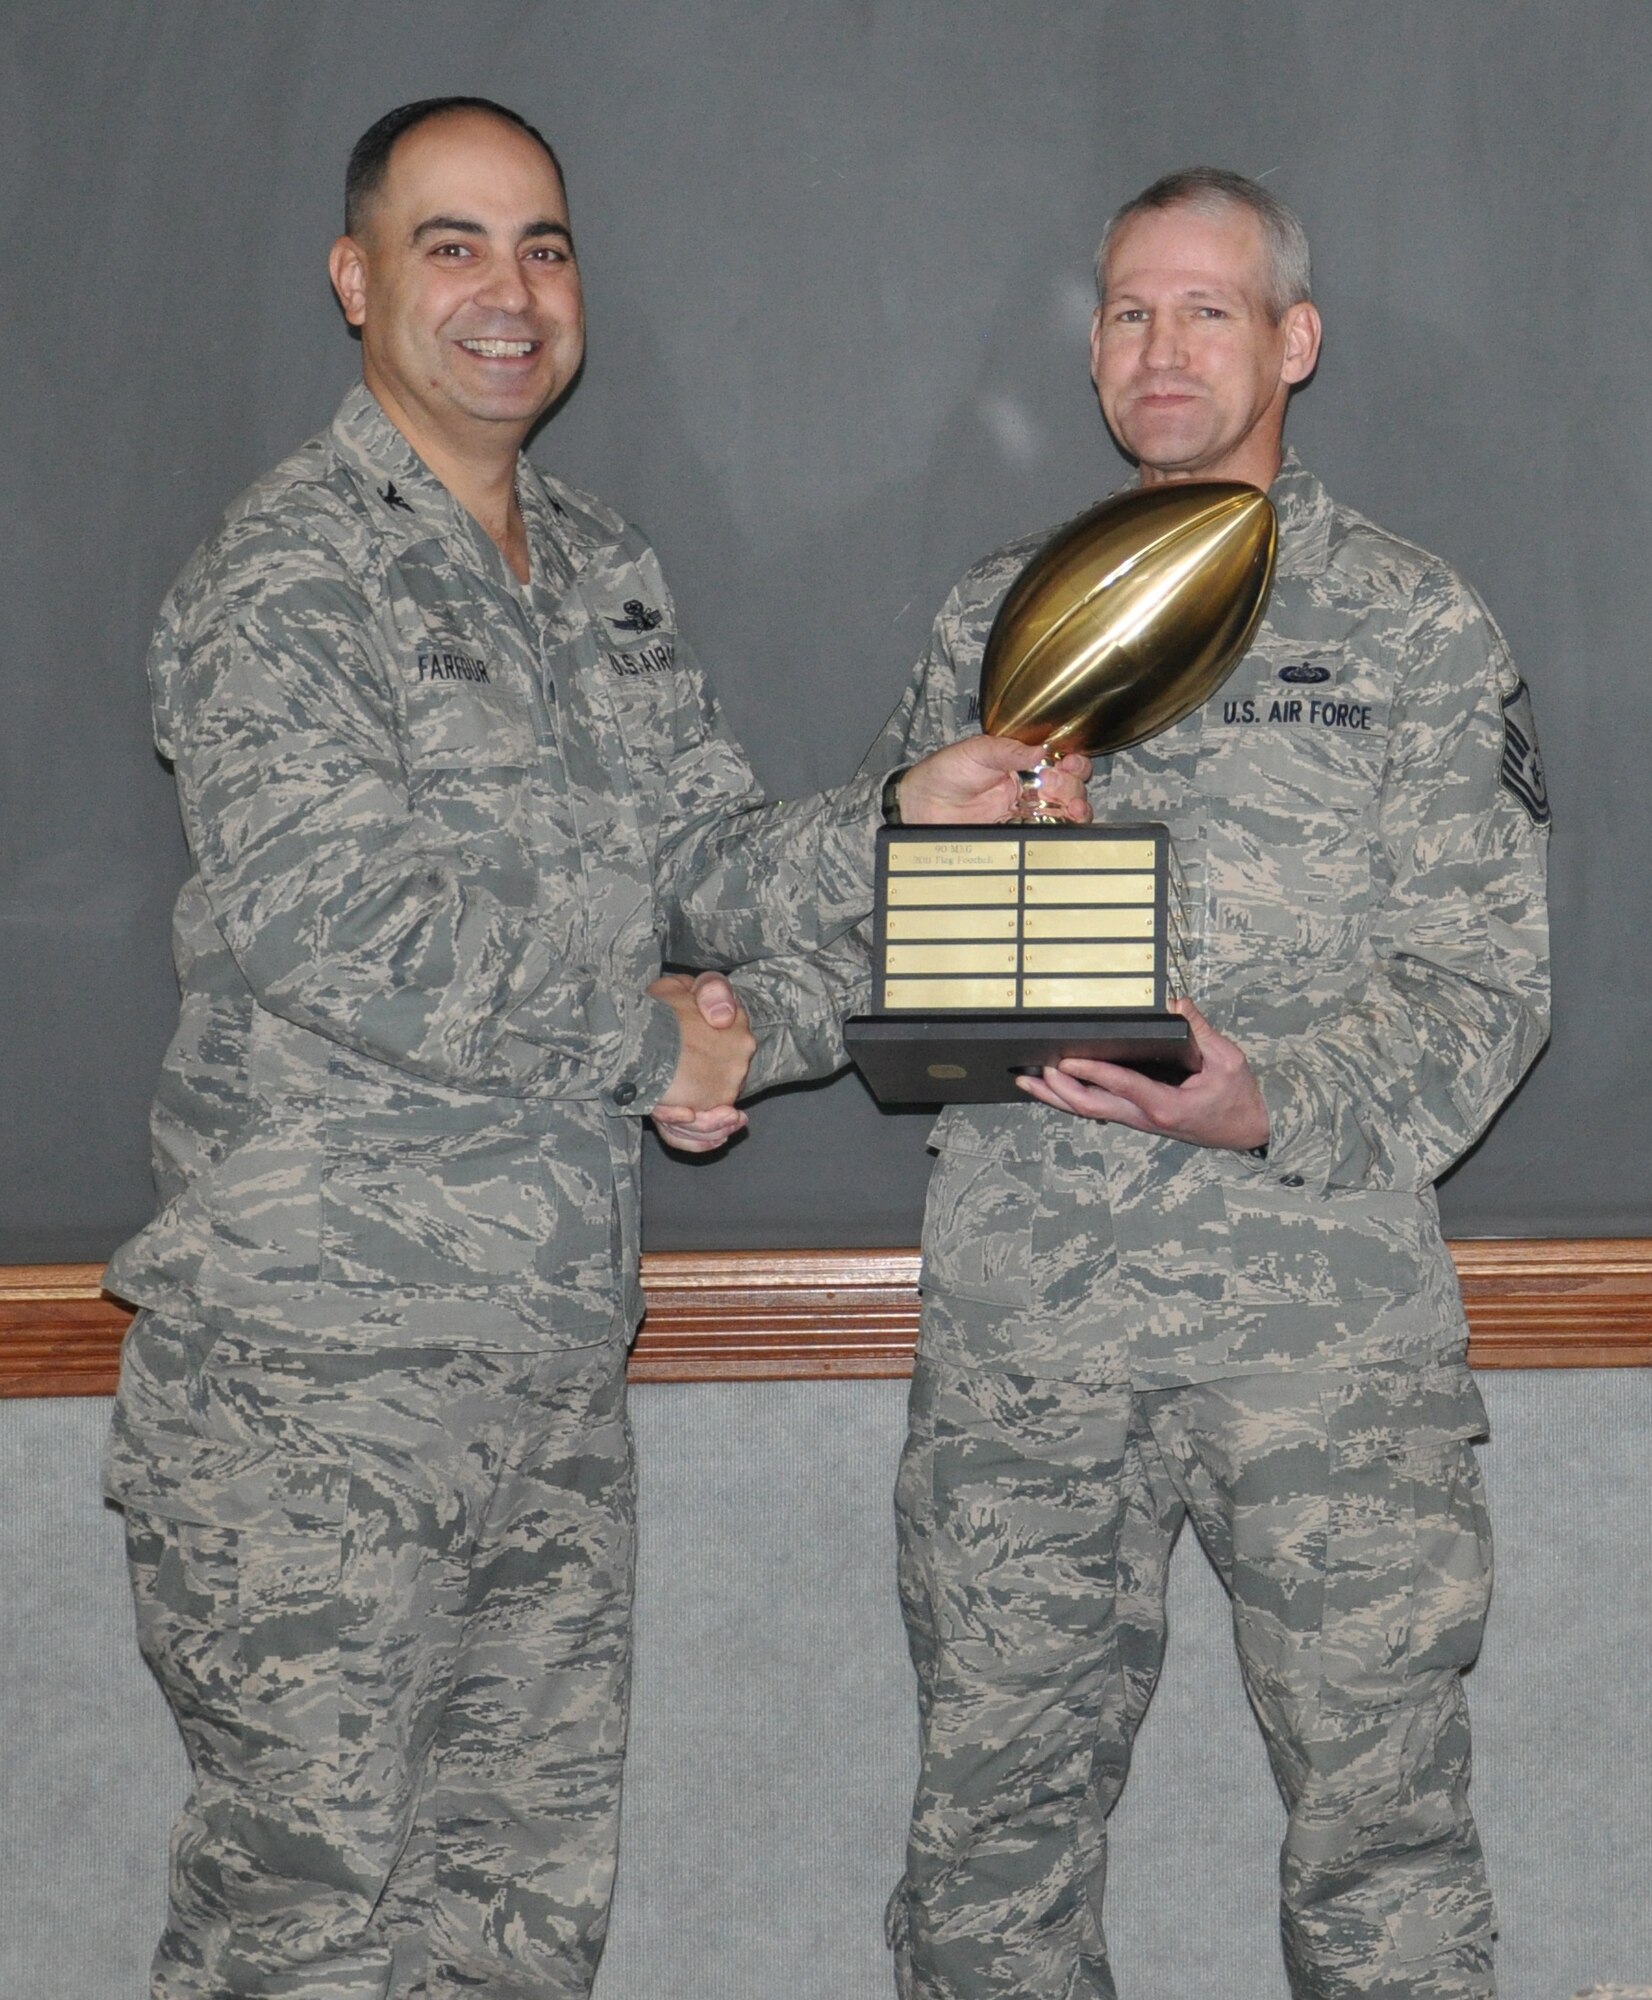 Col. George Farfour, 90th Missile Wing vice commander, presents Master Sgt. Shelton Humphries, 90th Maintenance Group NCO-in-charge of knowledge operations, the Commander’s Cup during a wing stand-up meeting held in the wing conference room Nov. 30. Humphries accepted the trophy on behalf of the 90th MXG, who went undefeated again in flag football. (U.S. Air Force photo by Senior Airman Mike Tryon)